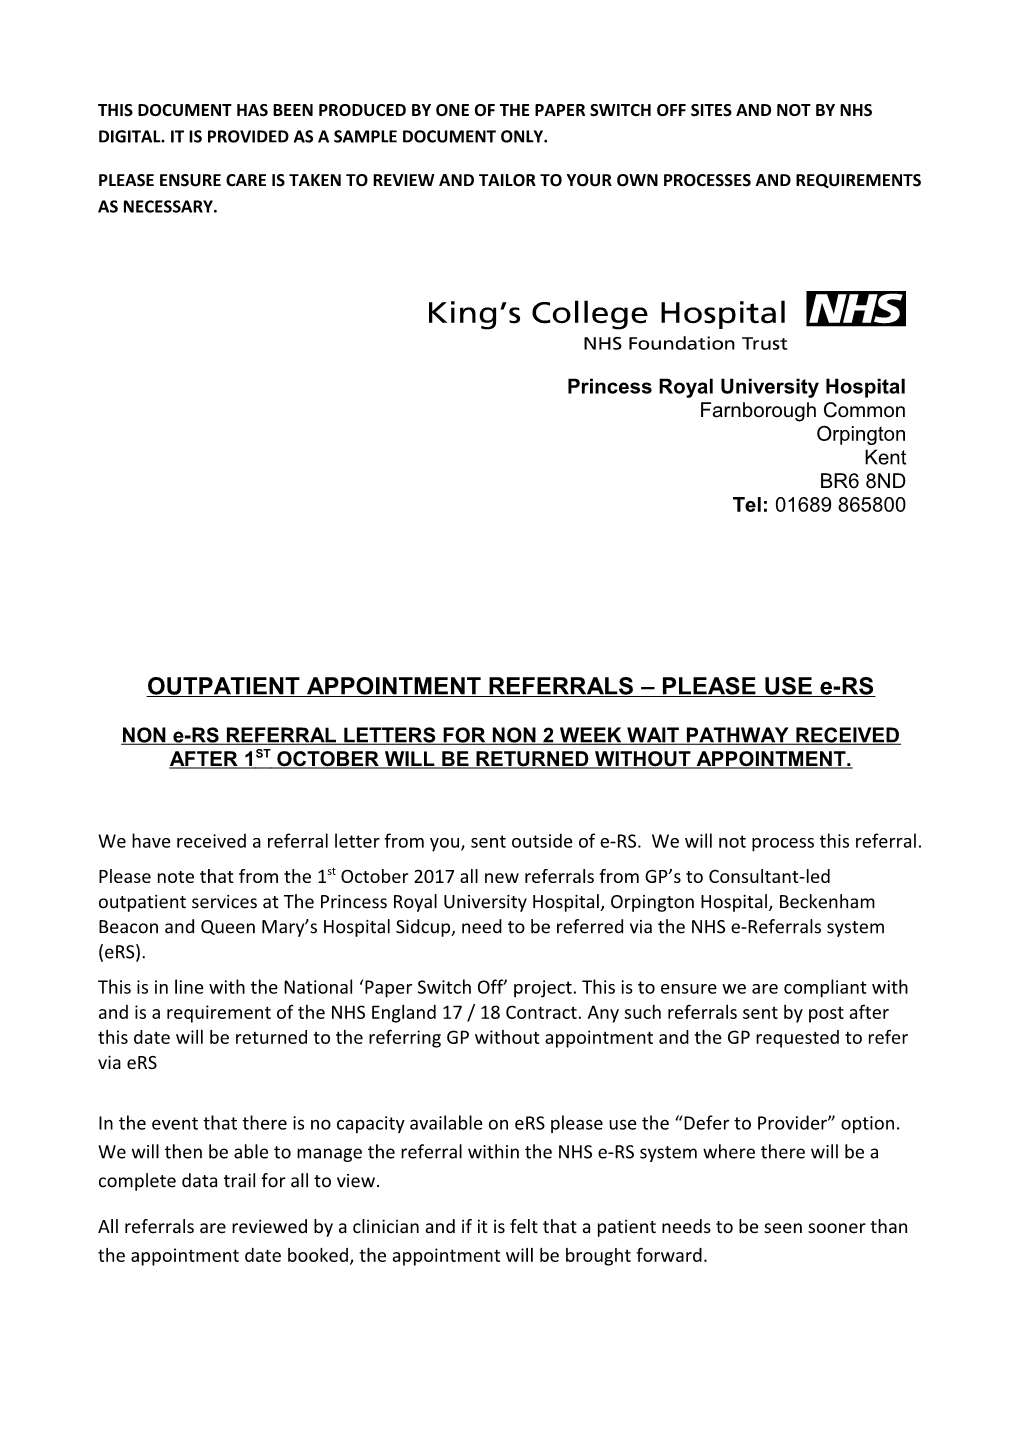 OUTPATIENT APPOINTMENT REFERRALS PLEASE USE E-RS